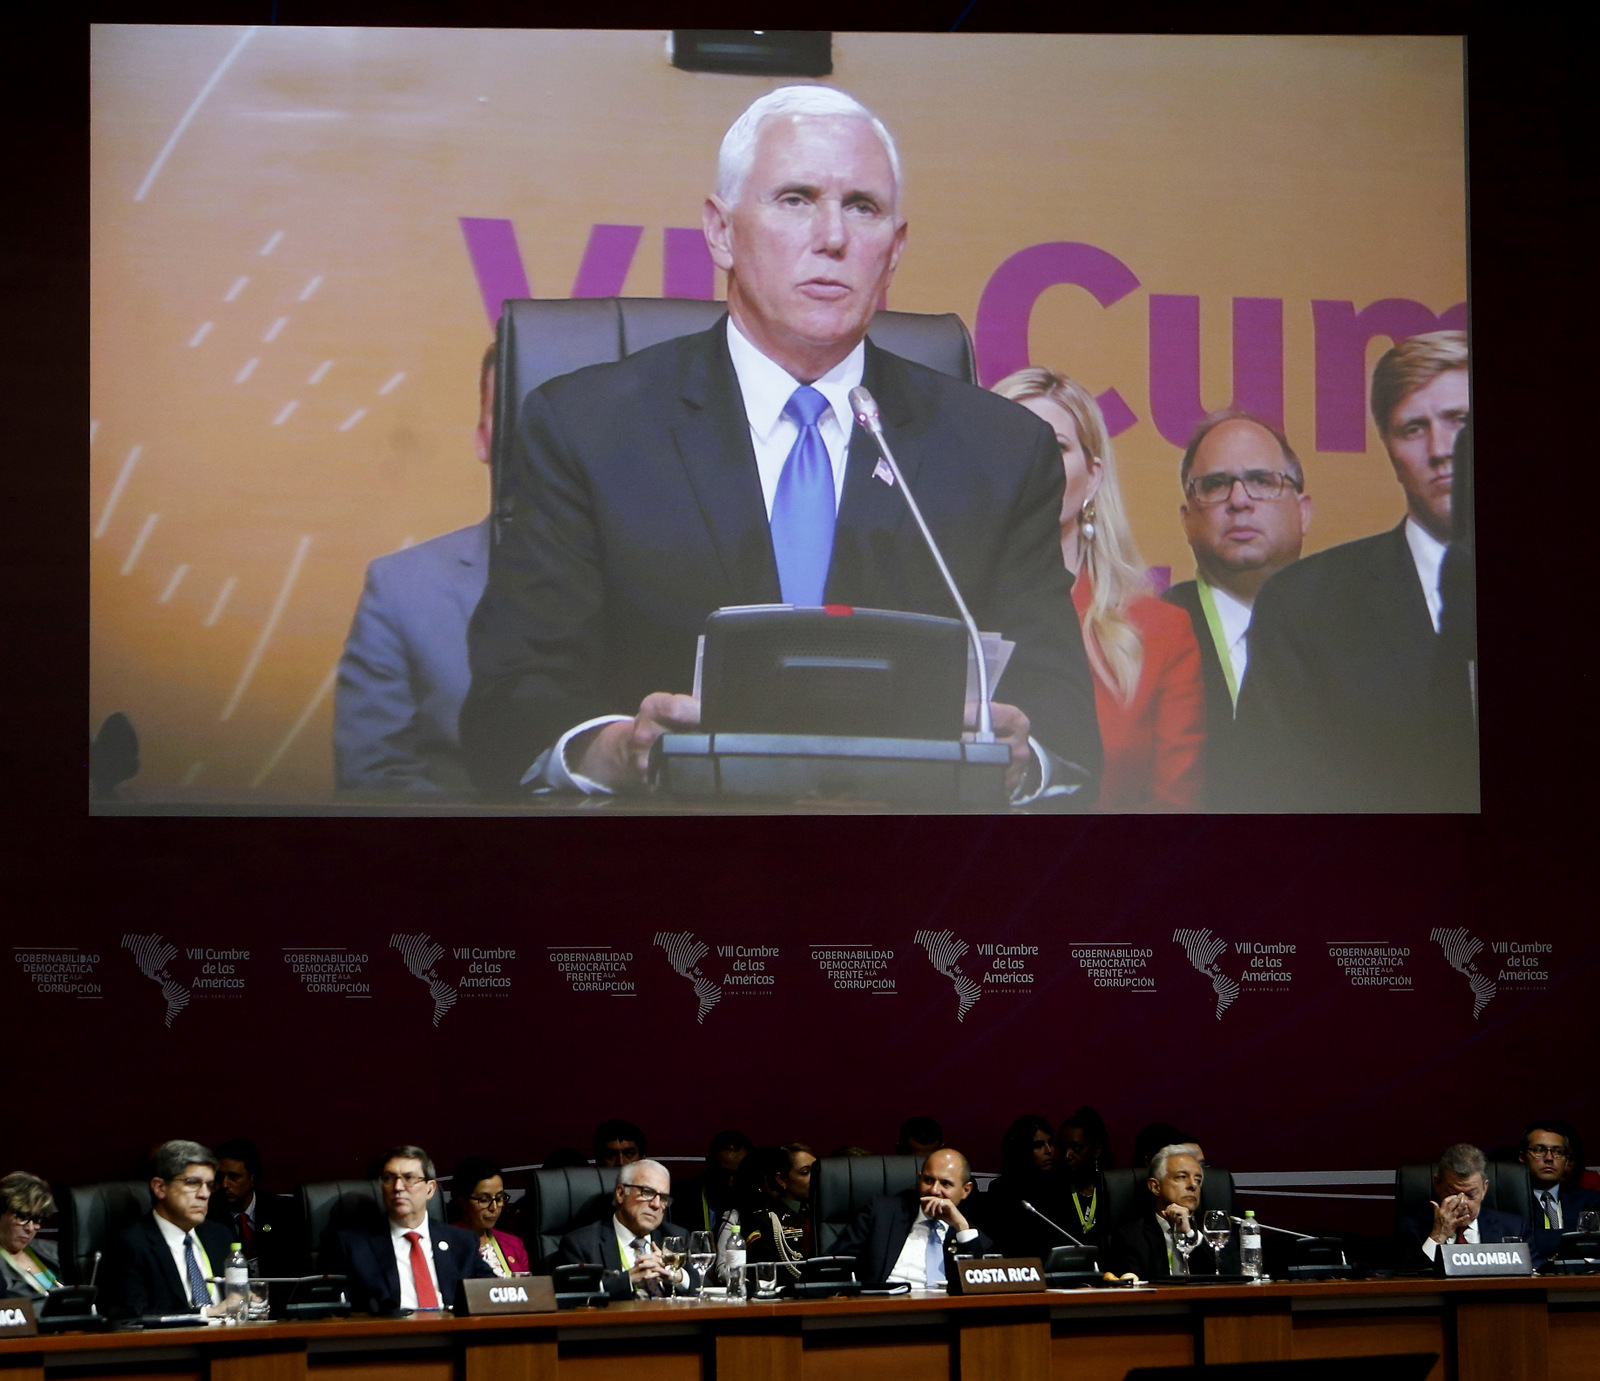 U.S. Vice President Mike Pence speaks at the plenary session of the Americas Summit in Lima, Peru, April 14, 2018.(AP/Karel Navarro)